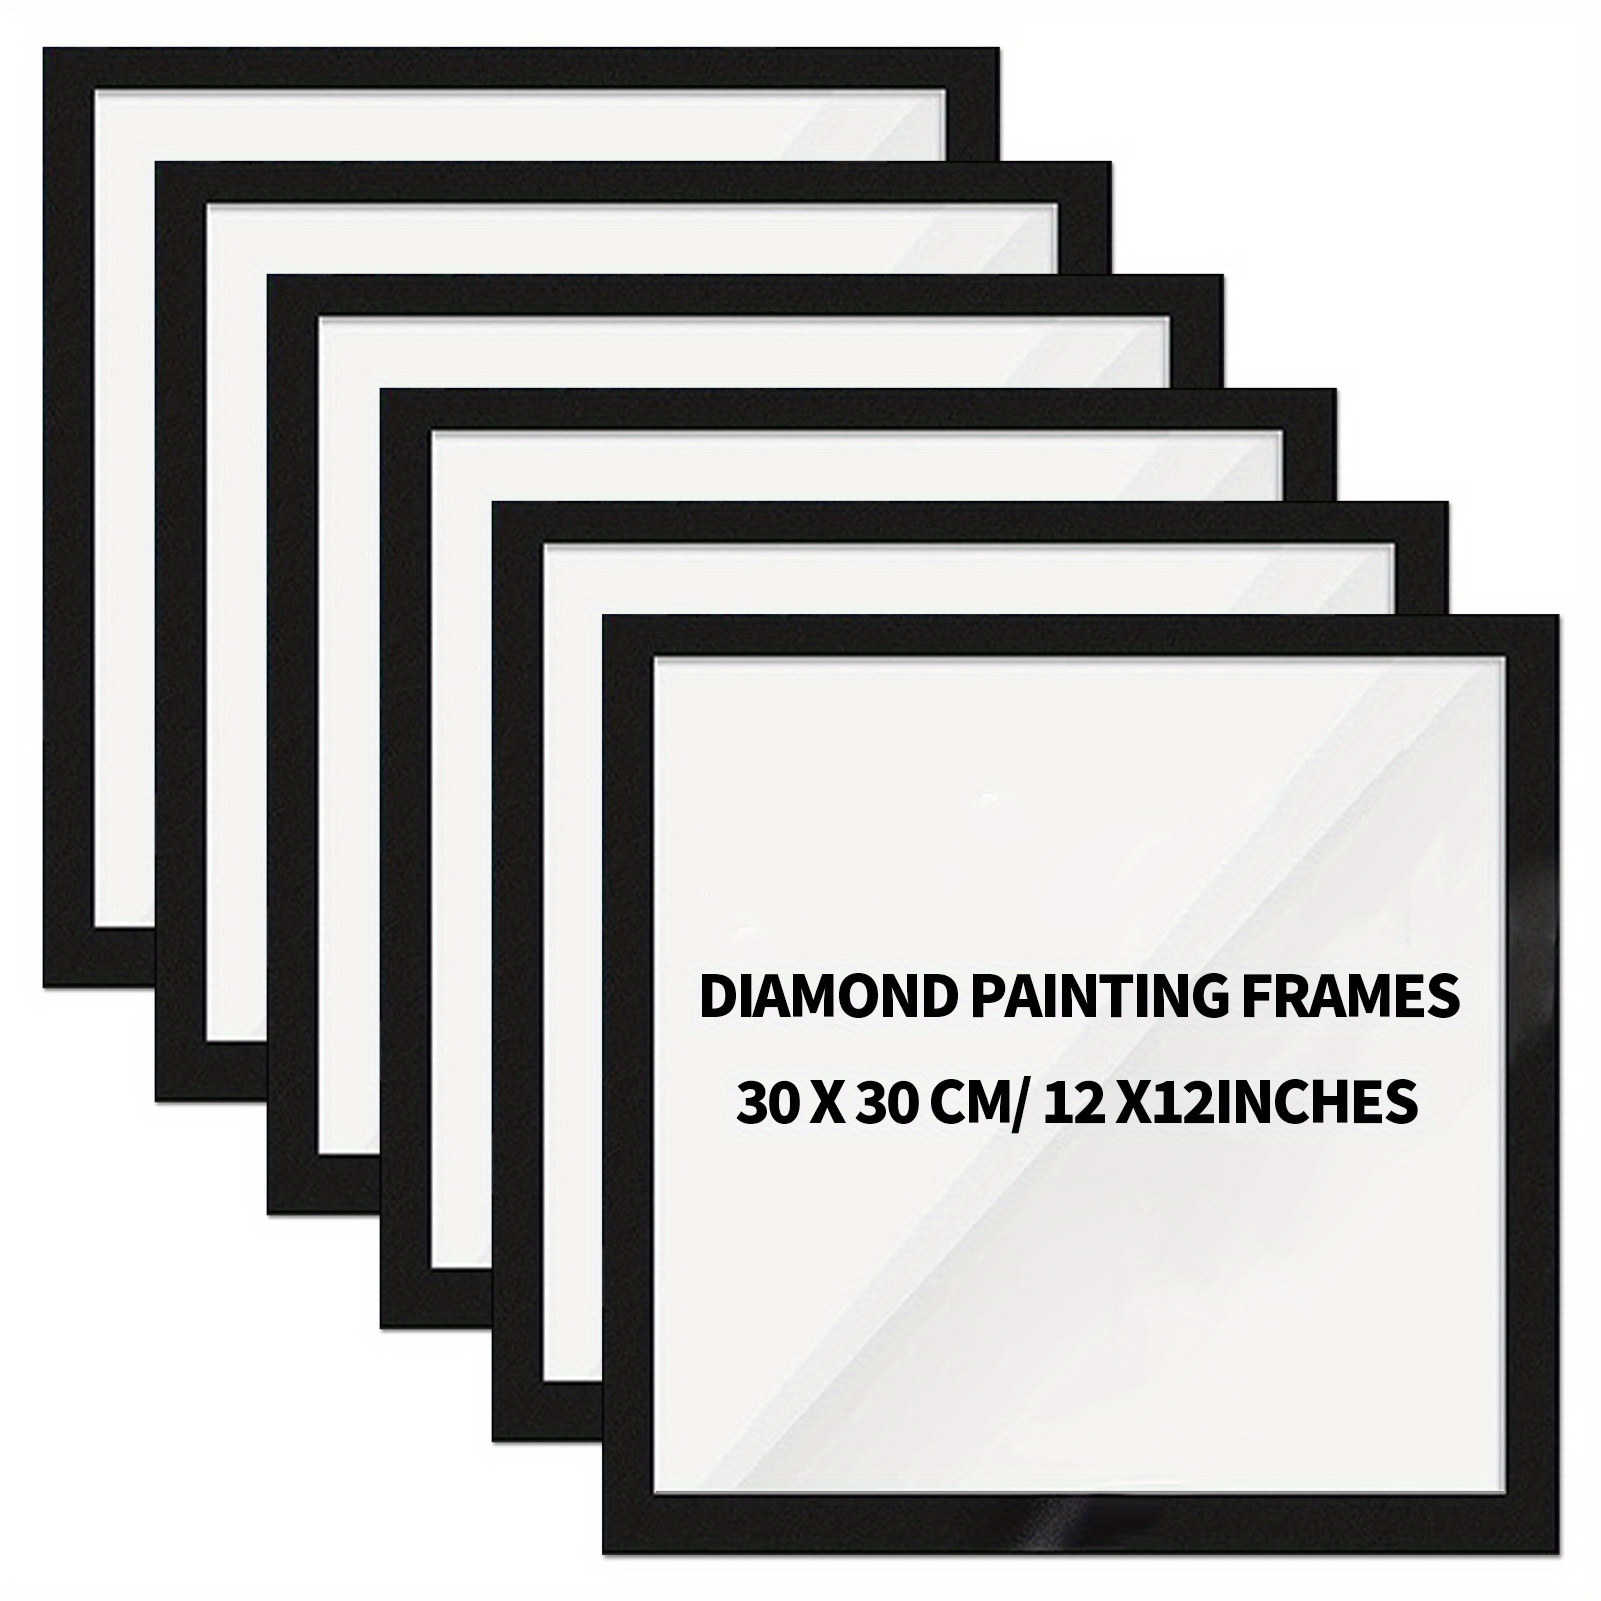 Diamond Painting Frames, Frames For 12x12in/30x30cm Diamond Painting  Canvas, Magnetic Diamond Art Frame Self-adhesive Diamond Art Accessories,  Frames